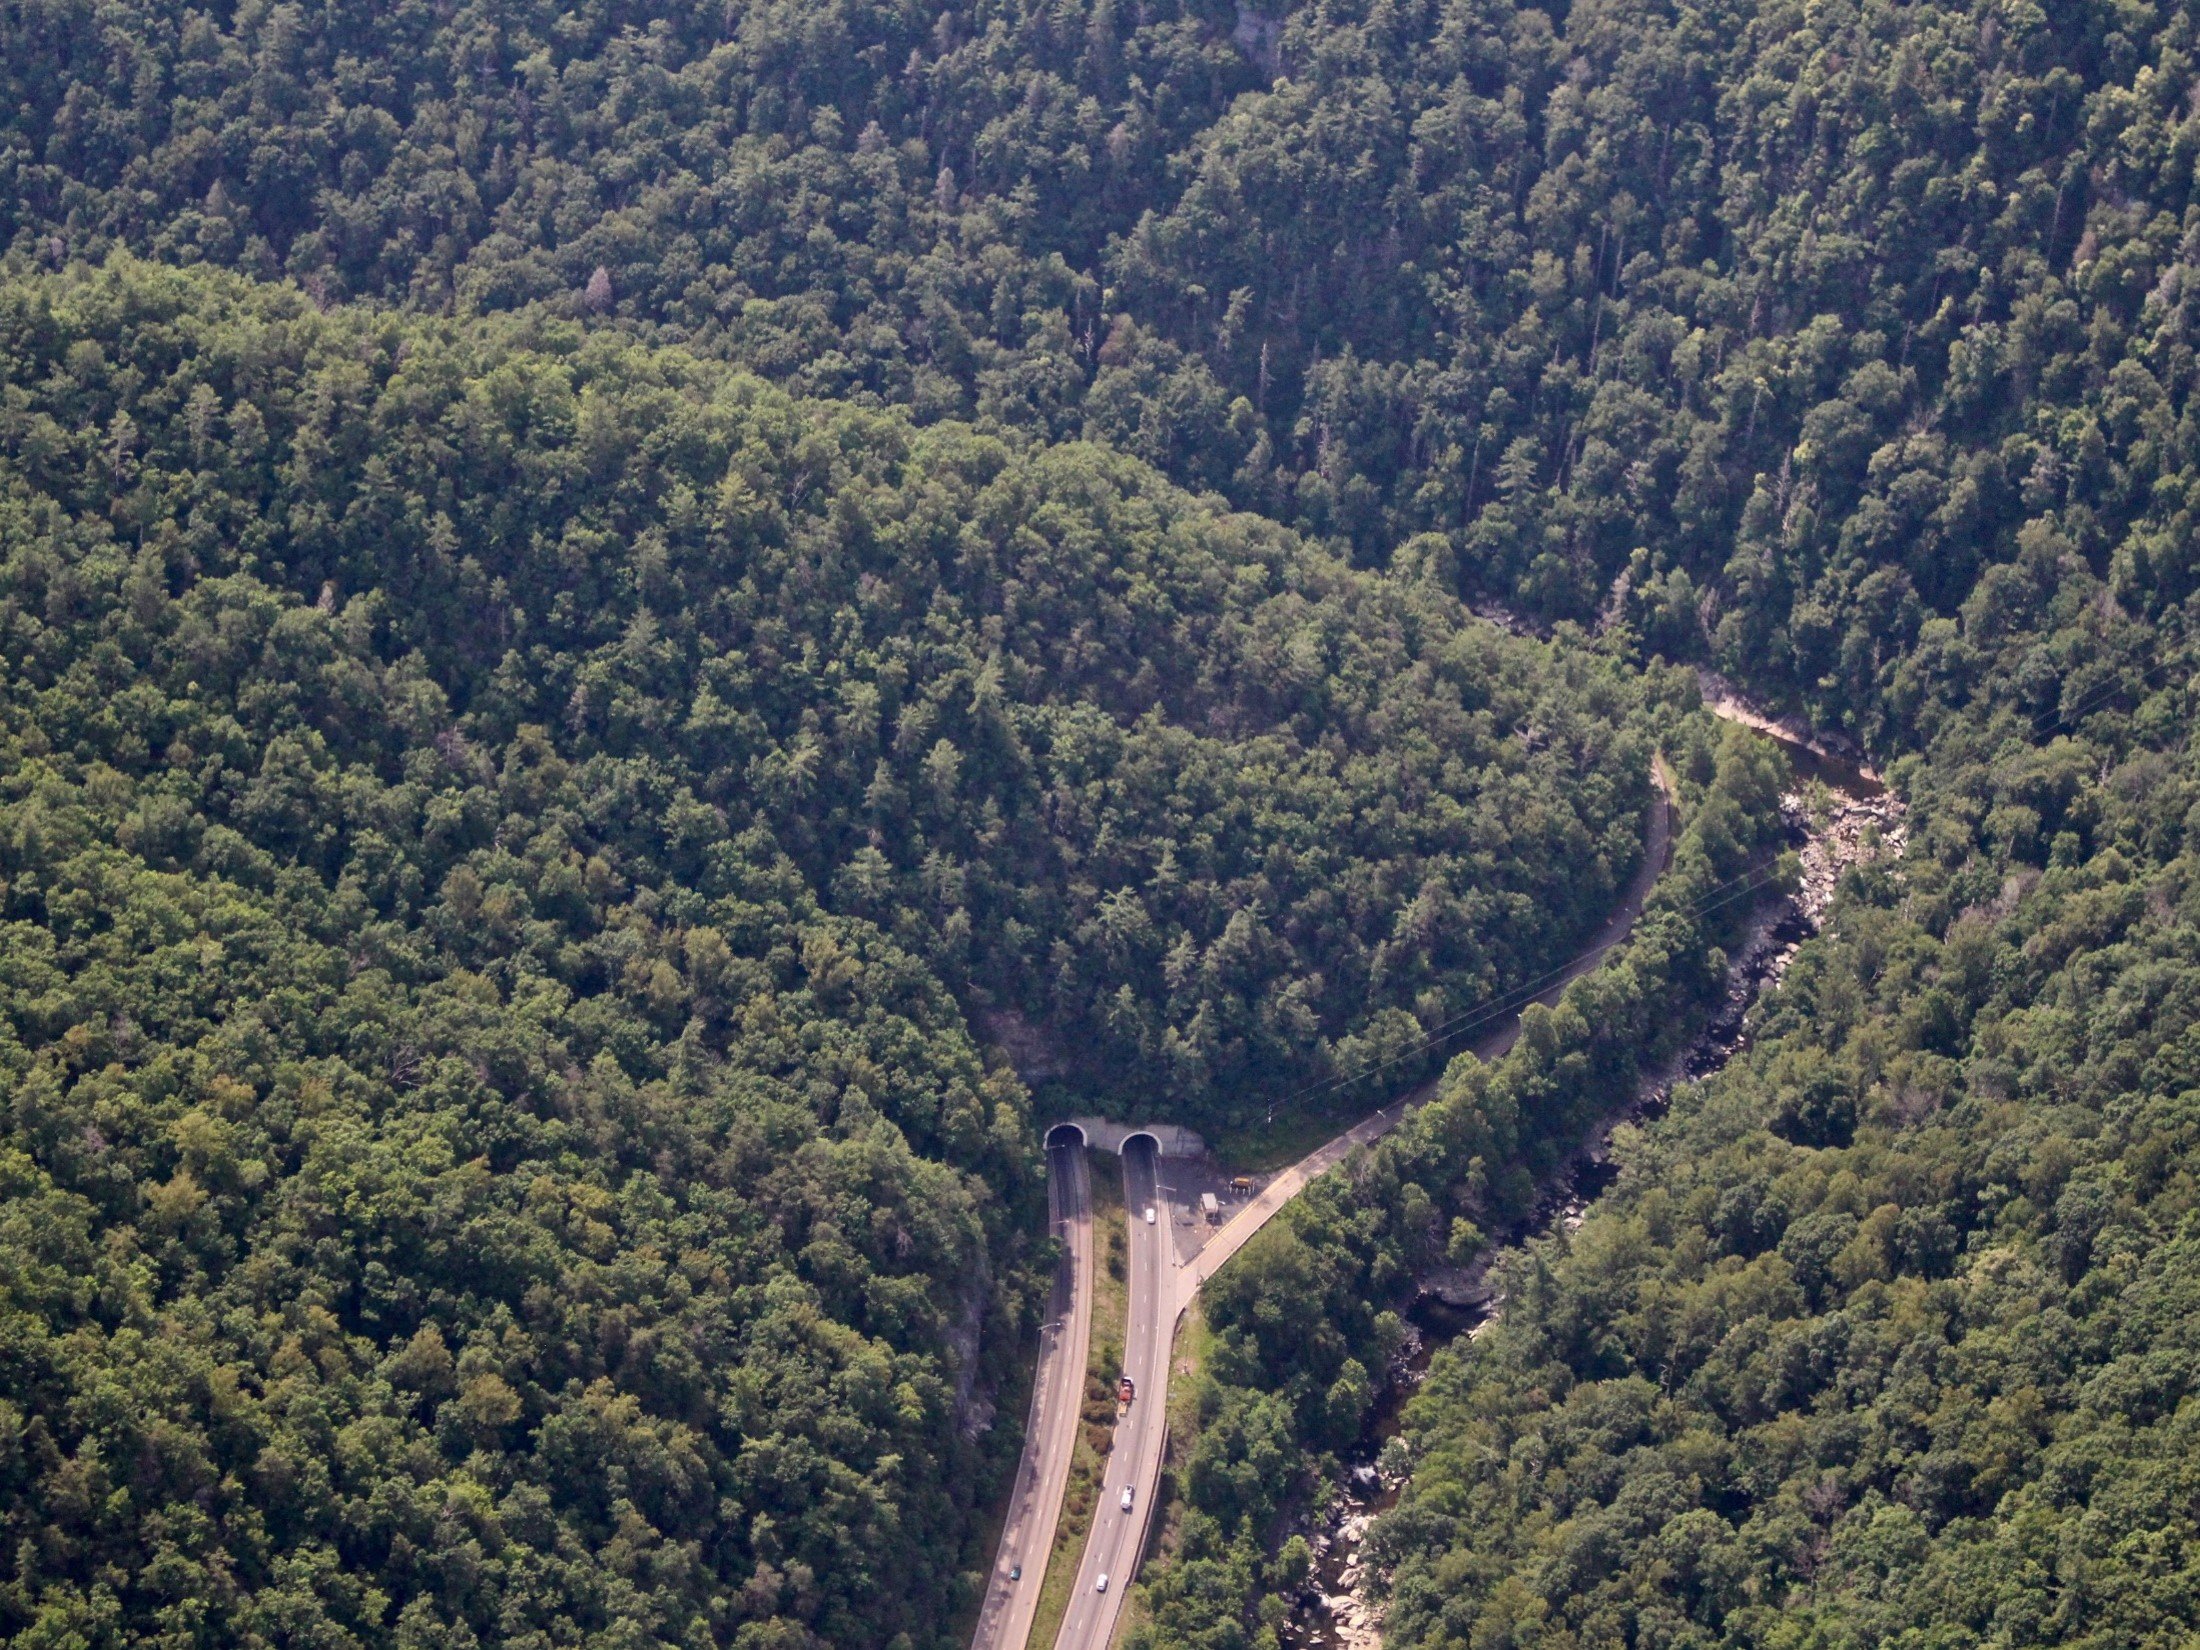  The Pigeon River Gorge’s Double Tunnel, where Interstate 40 passes fully under the mountains, provides some of the best existing connectivity for wildlife within the study area and beyond. Photo: Jake Faber, Southwings 